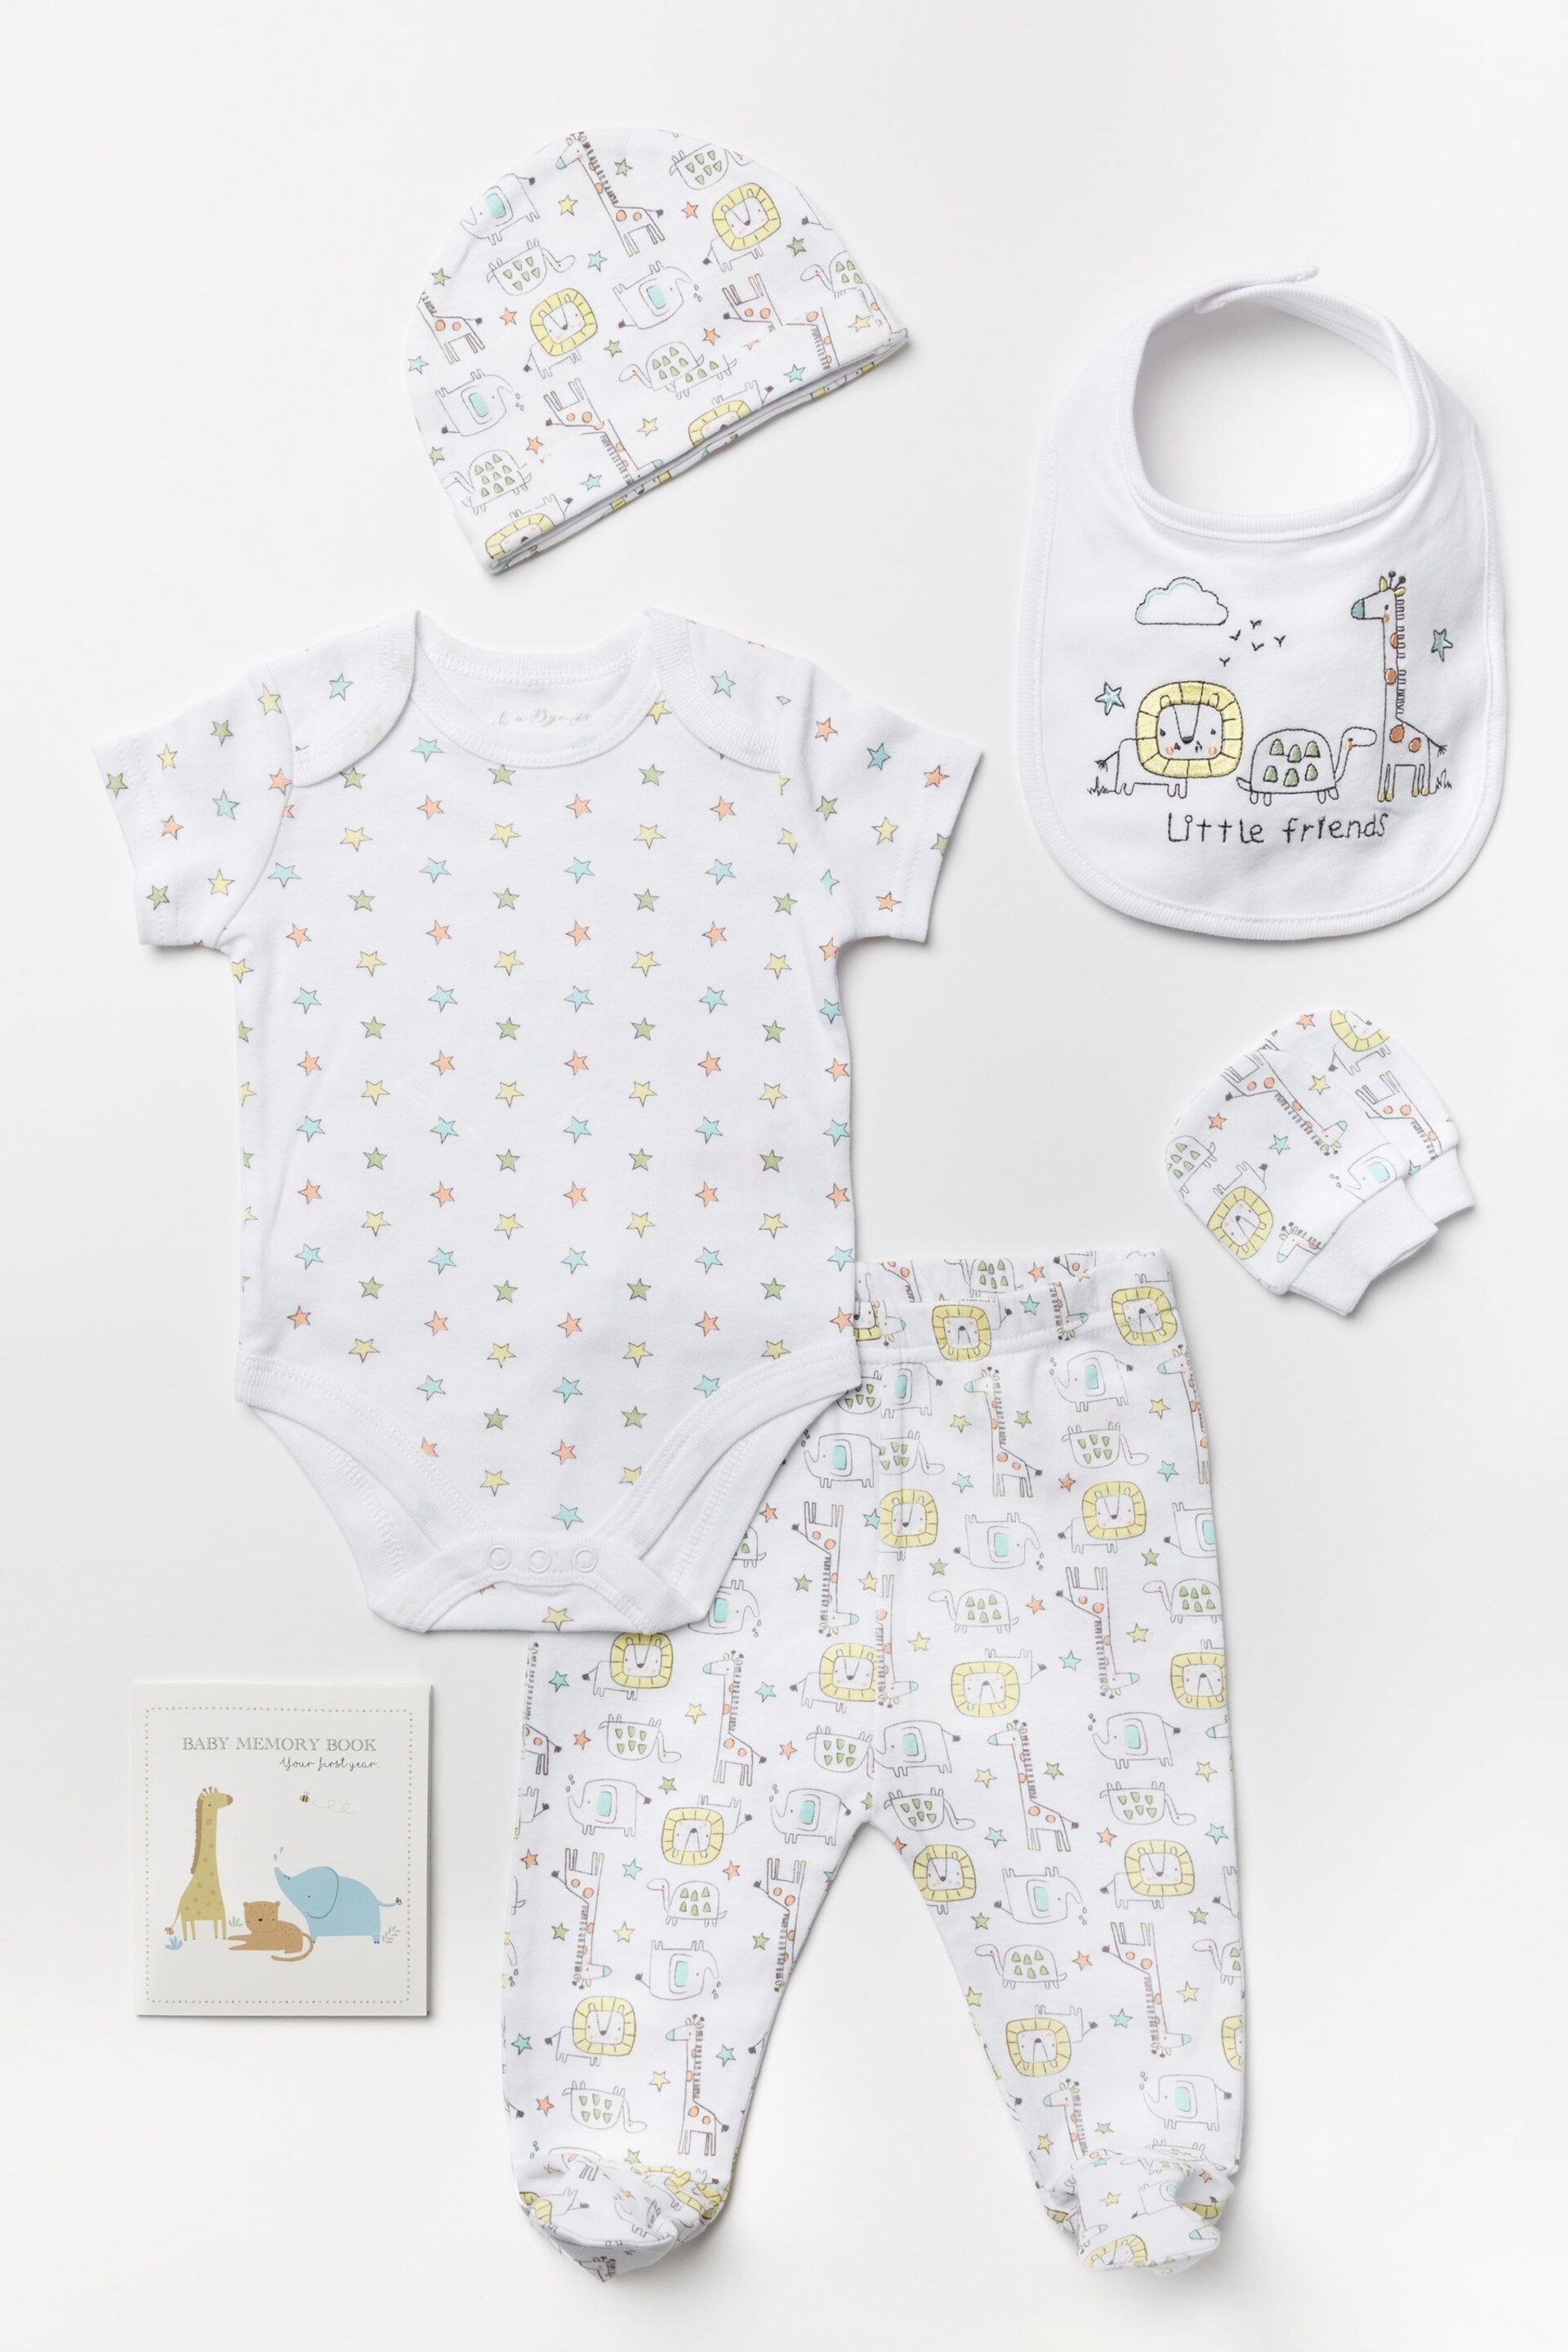 Rock-A-Bye Baby Boutique Animal Print Cotton 6 Piece White Gift Set - Image 1 of 6